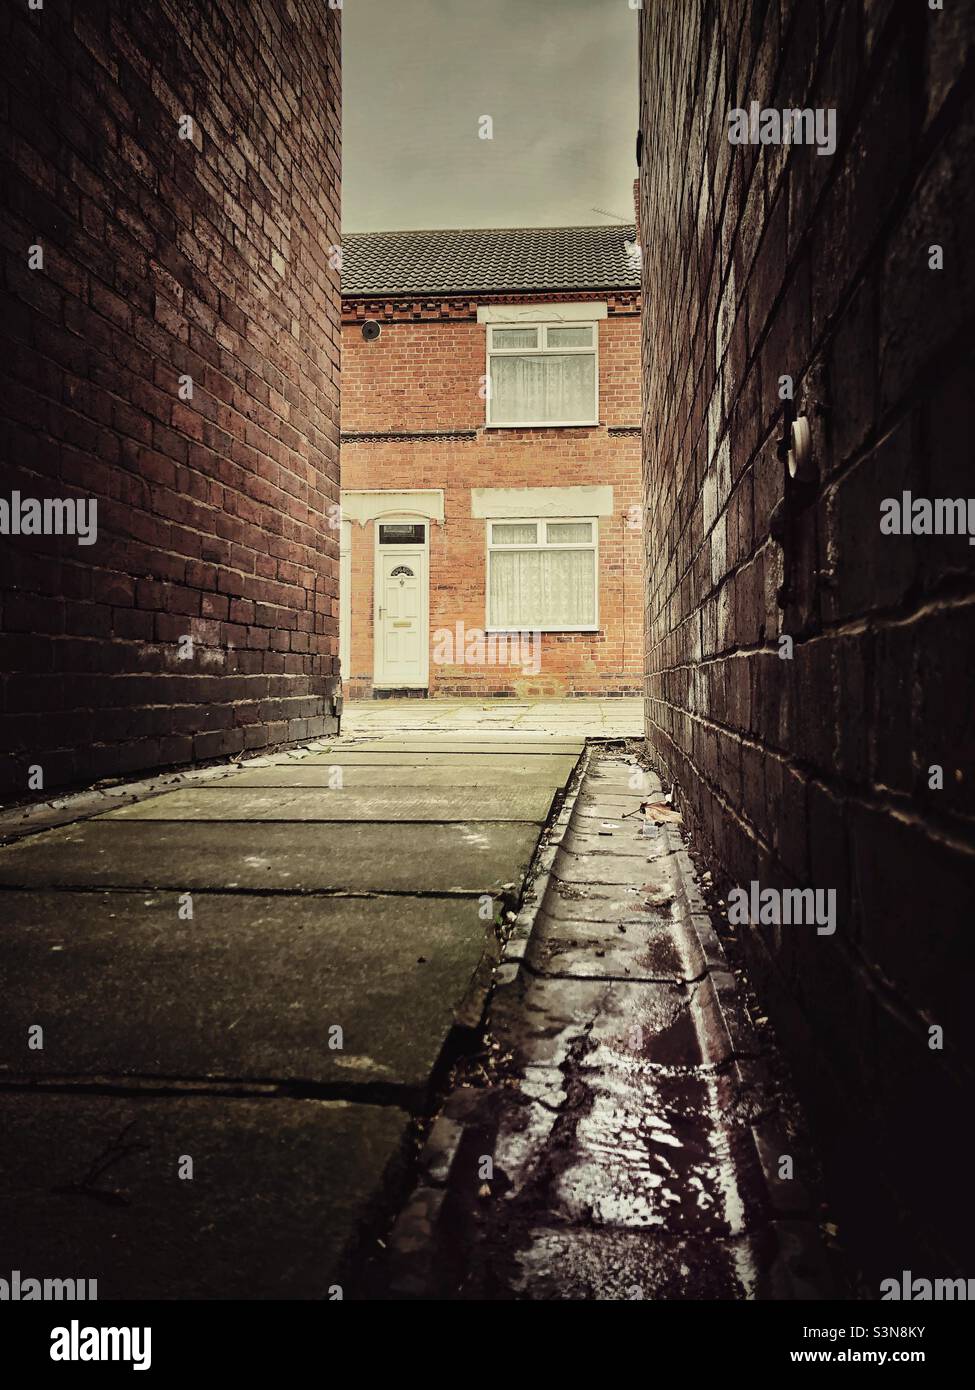 A view of a rundown terraced house from a back alleyway in the north of England with copy space Stock Photo